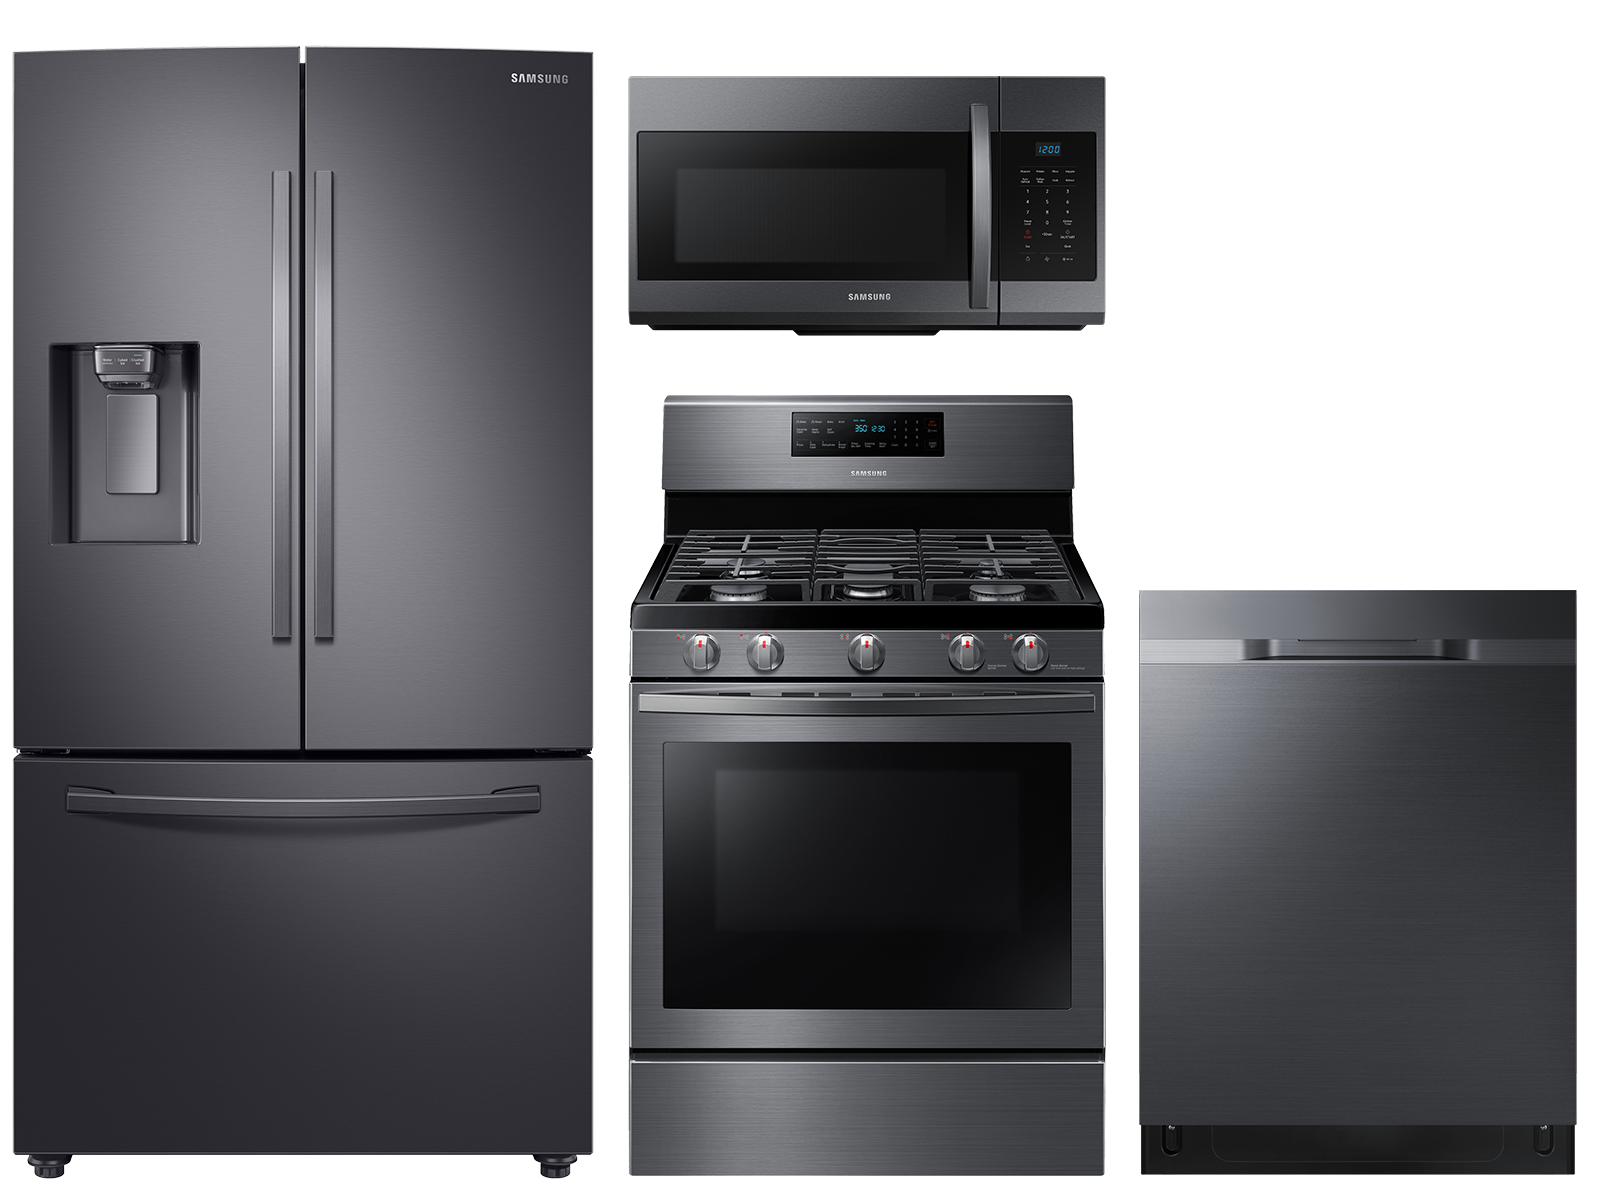 Large Capacity 3-door Refrigerator + Gas Range with Convection + StormWash™ Dishwasher + Microwave in Black Stainless